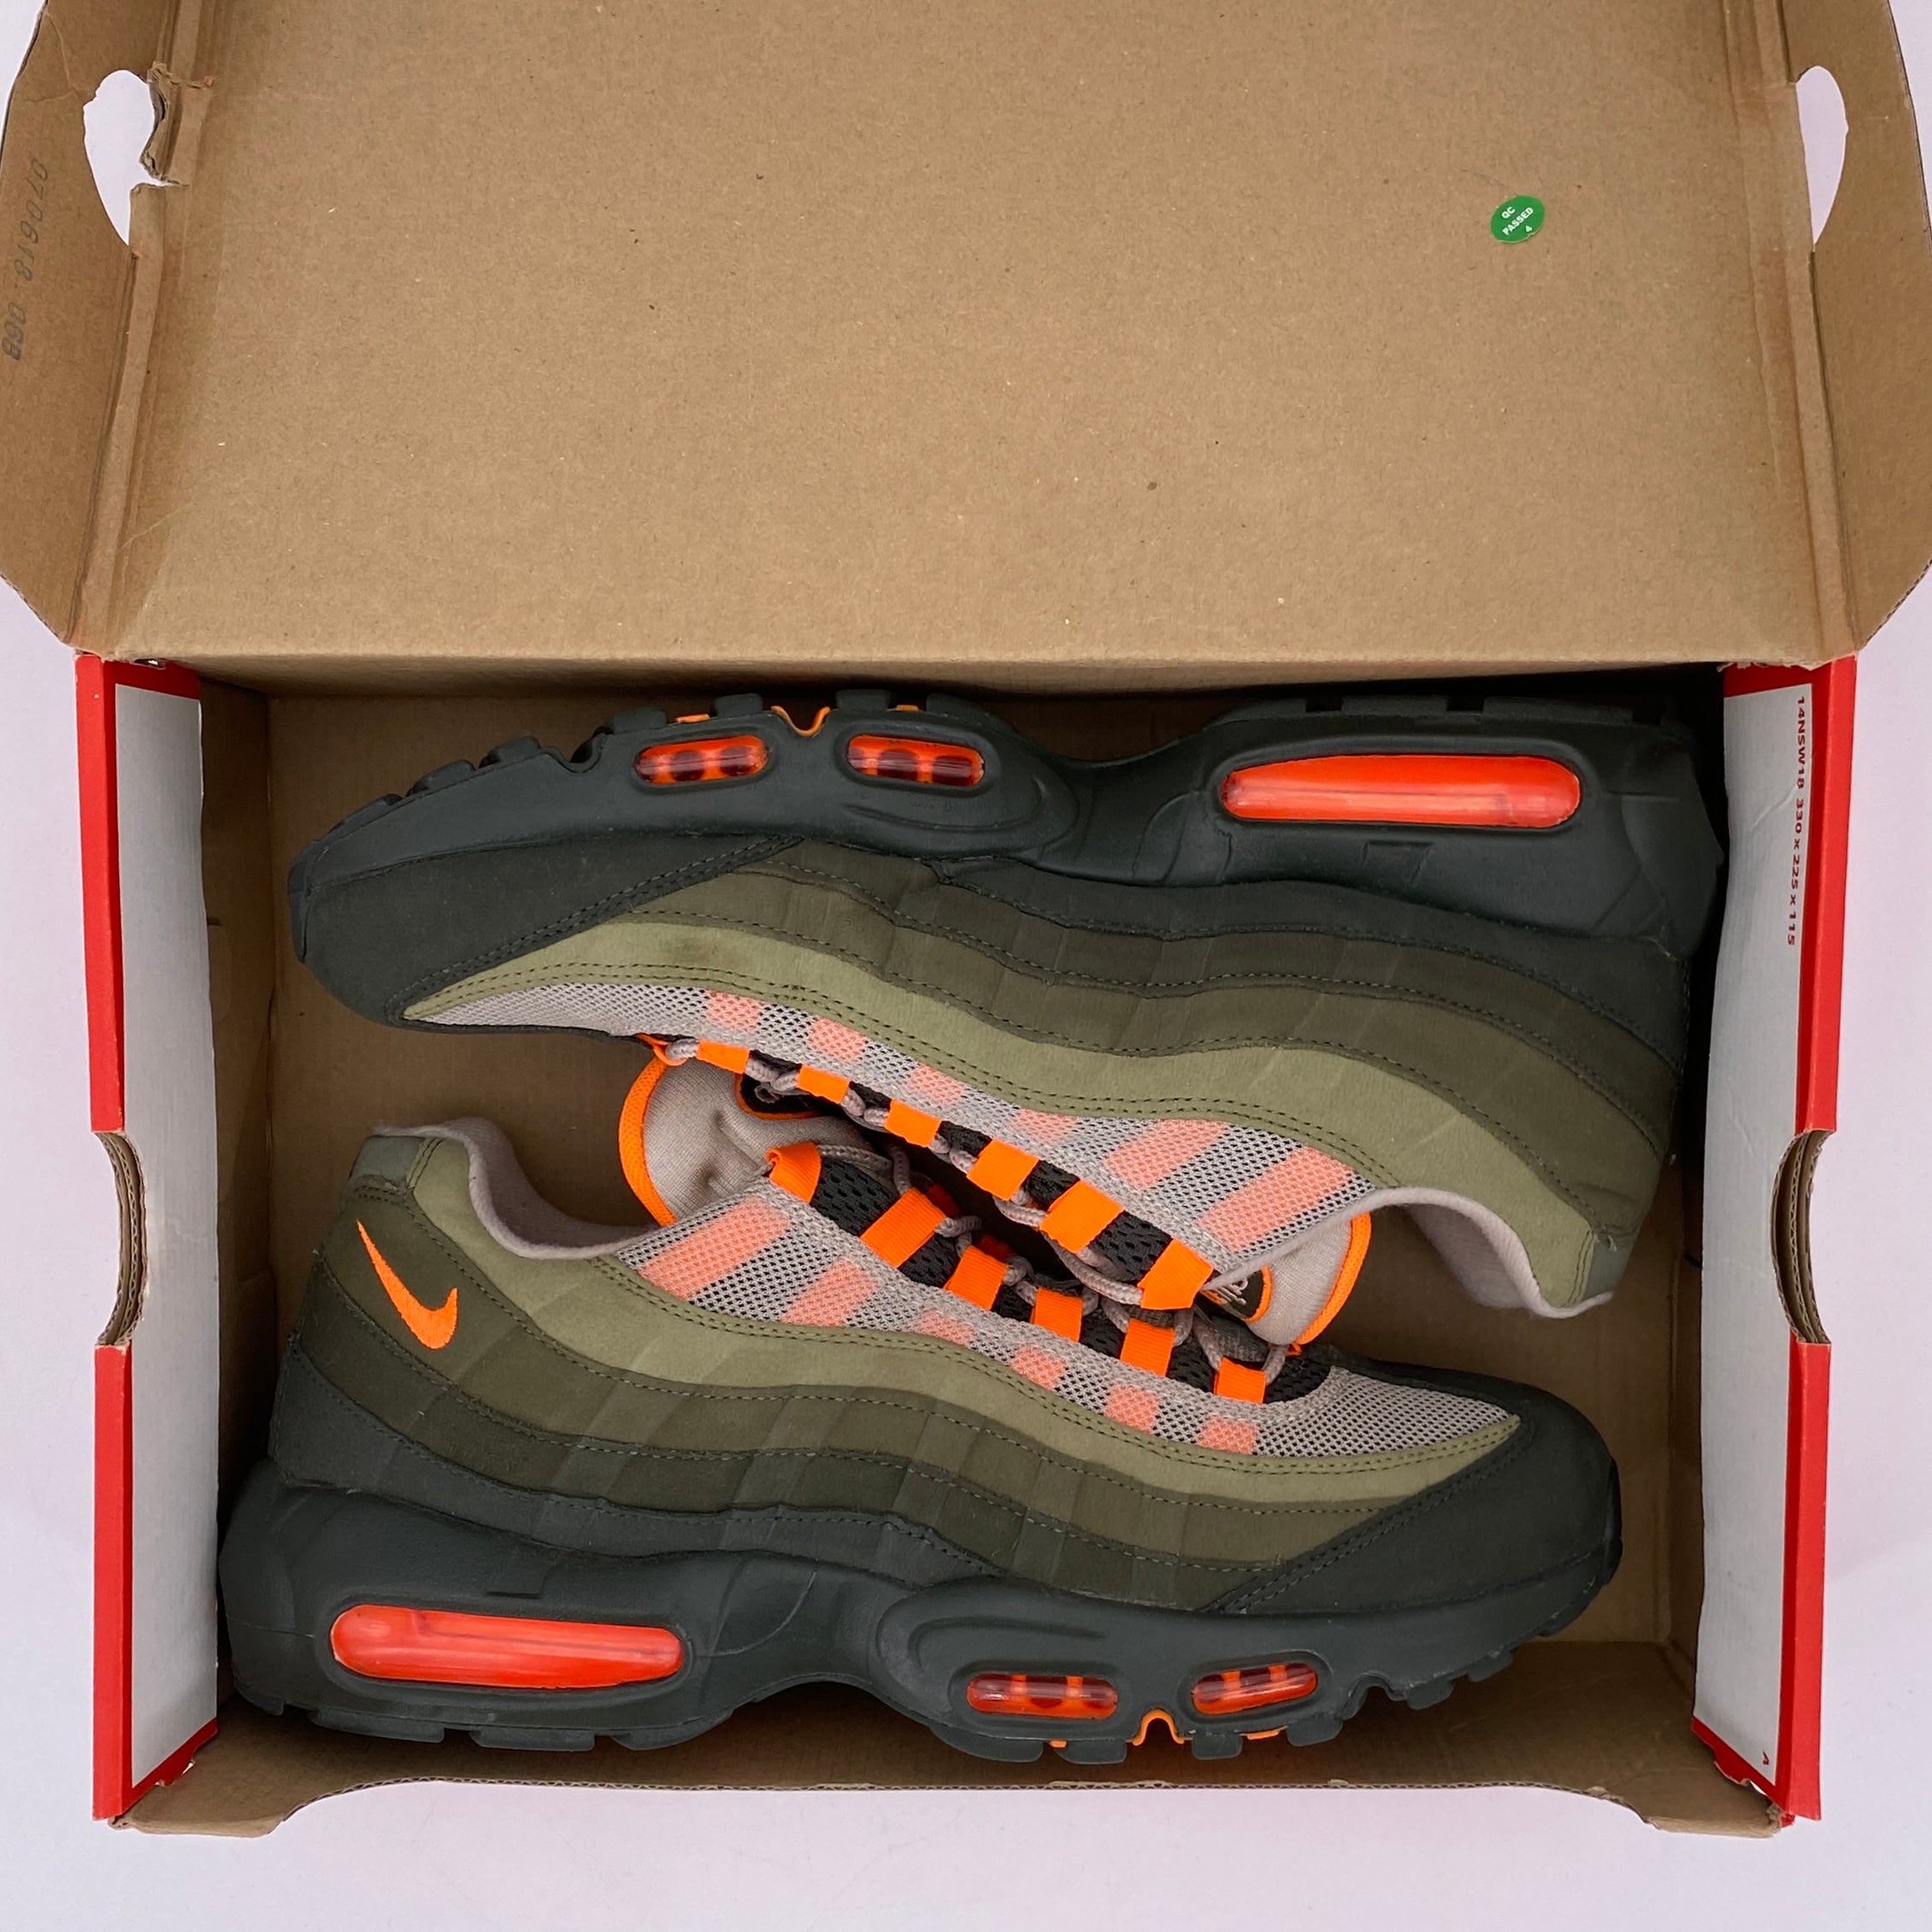 Nike Air Max 95 &quot;Olive Orange&quot; 2018 Used Size 10.5